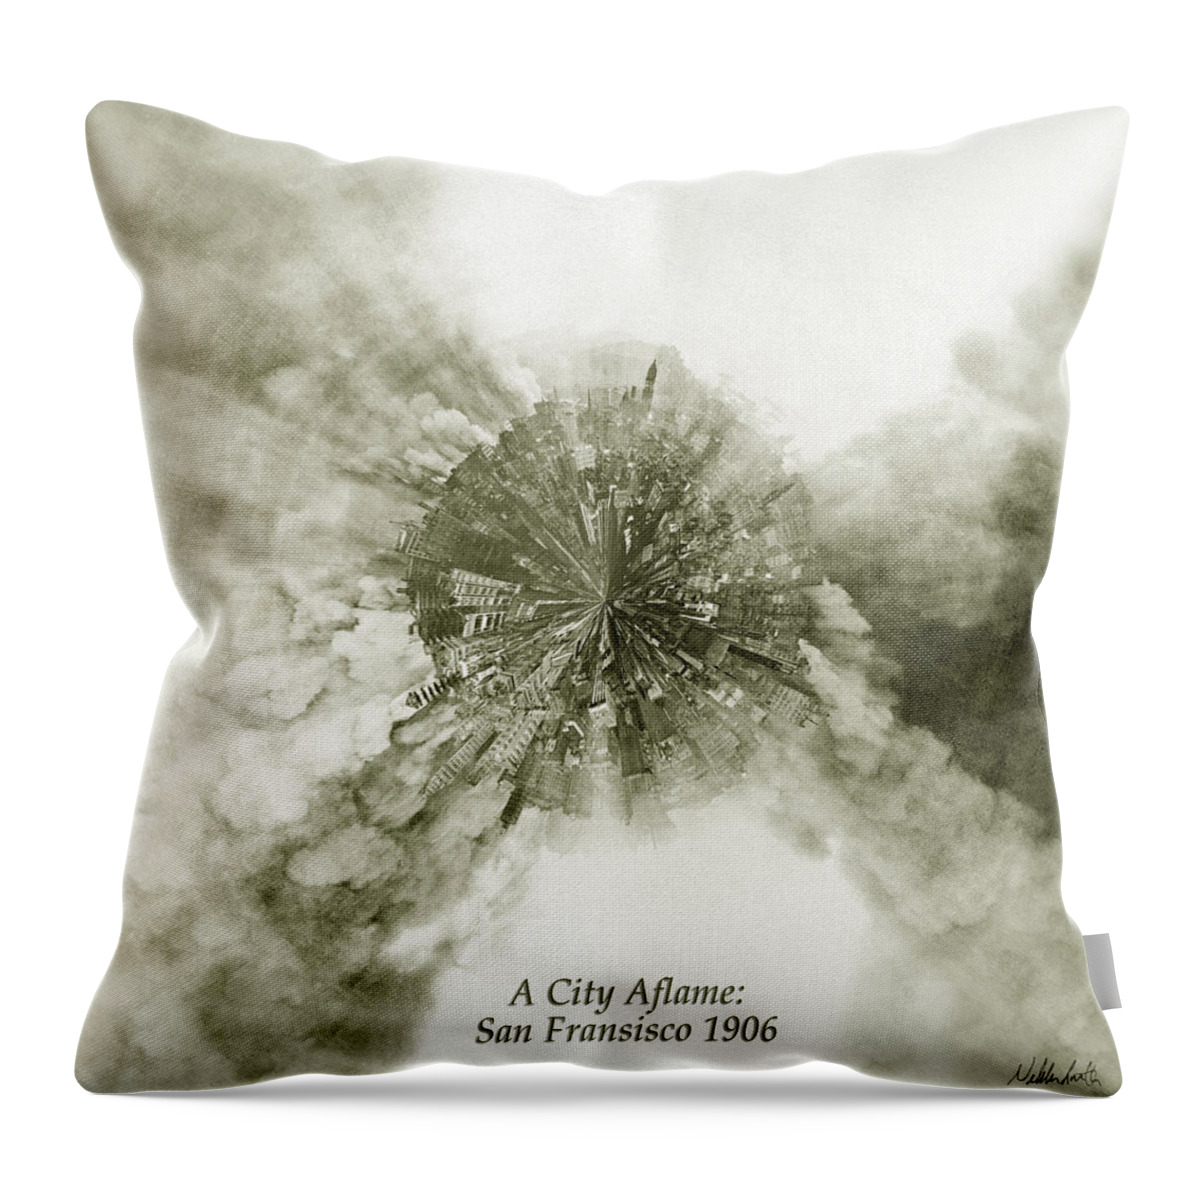 San Francisco Throw Pillow featuring the photograph Planet Wee San Fransisco 1906 Fire by Nikki Smith